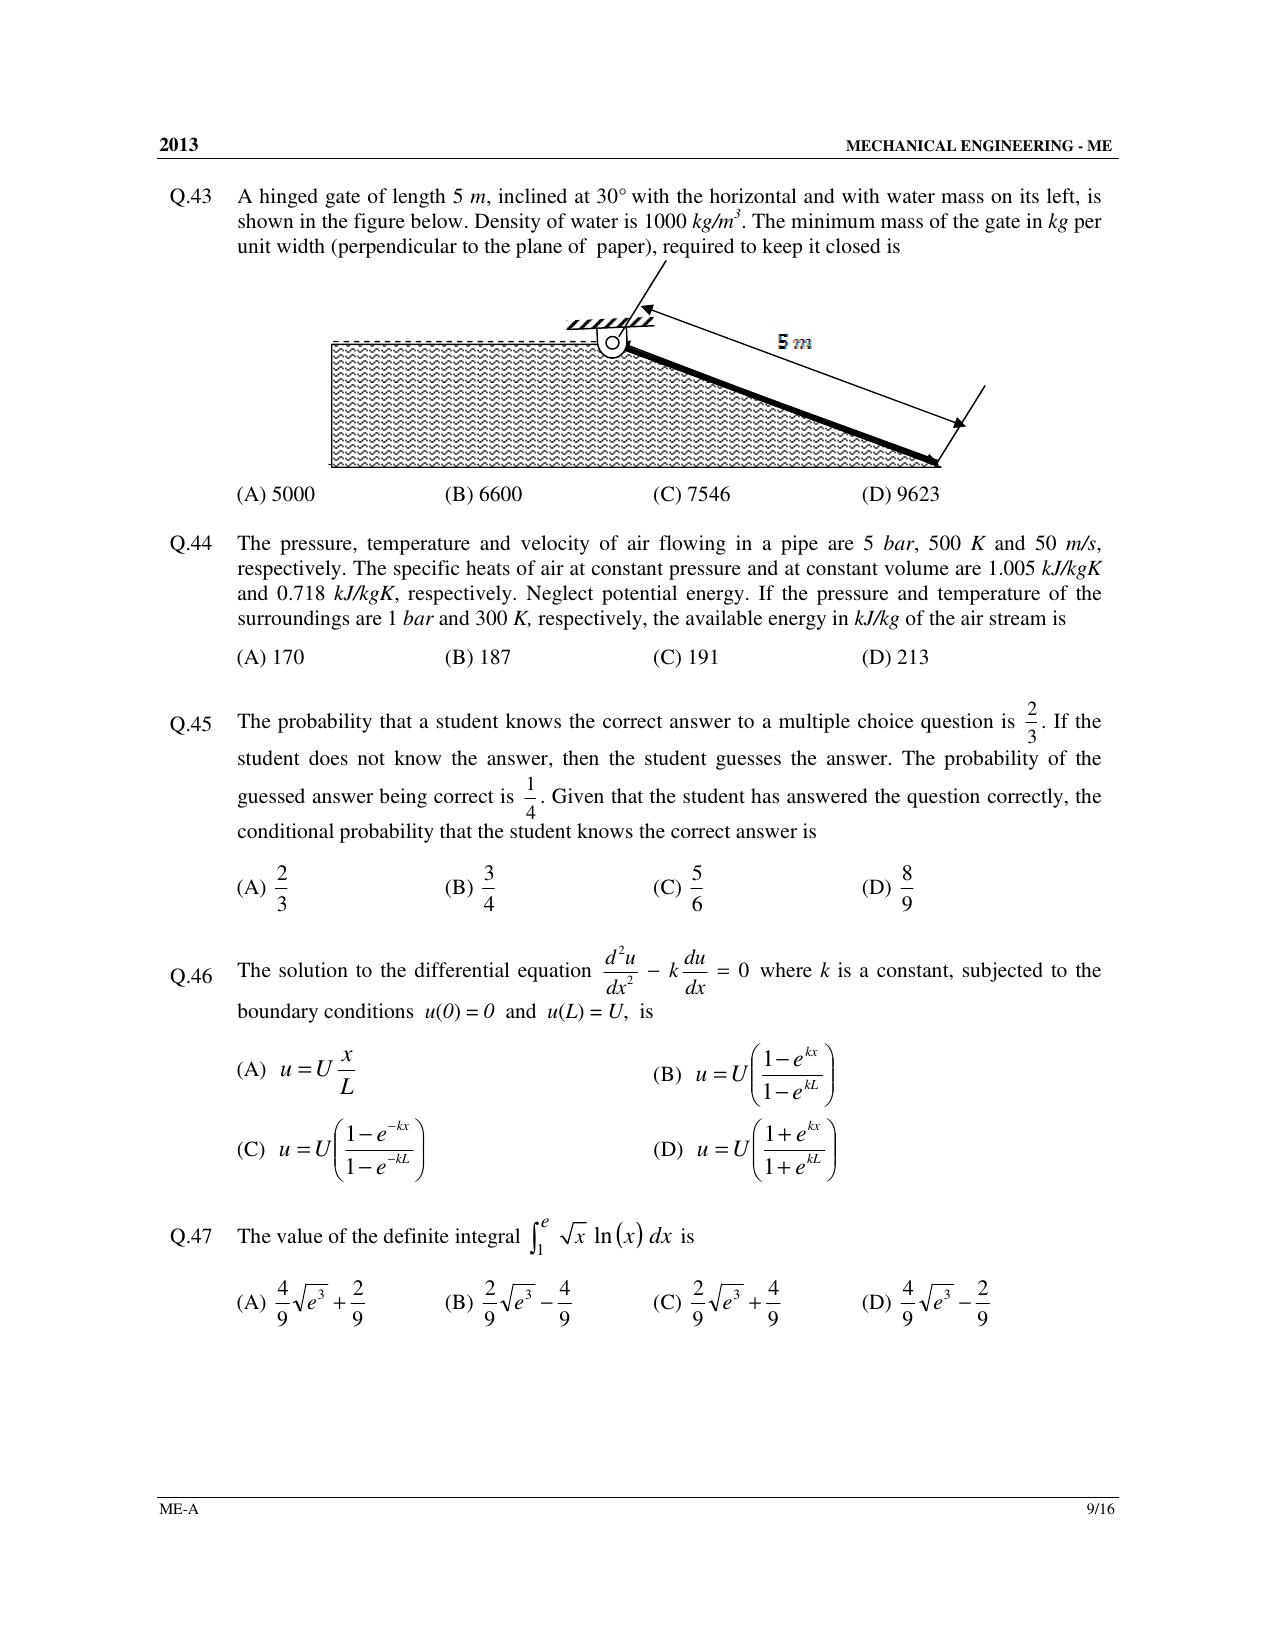 GATE 2013 Mechanical Engineering (ME) Question Paper with Answer Key - Page 10